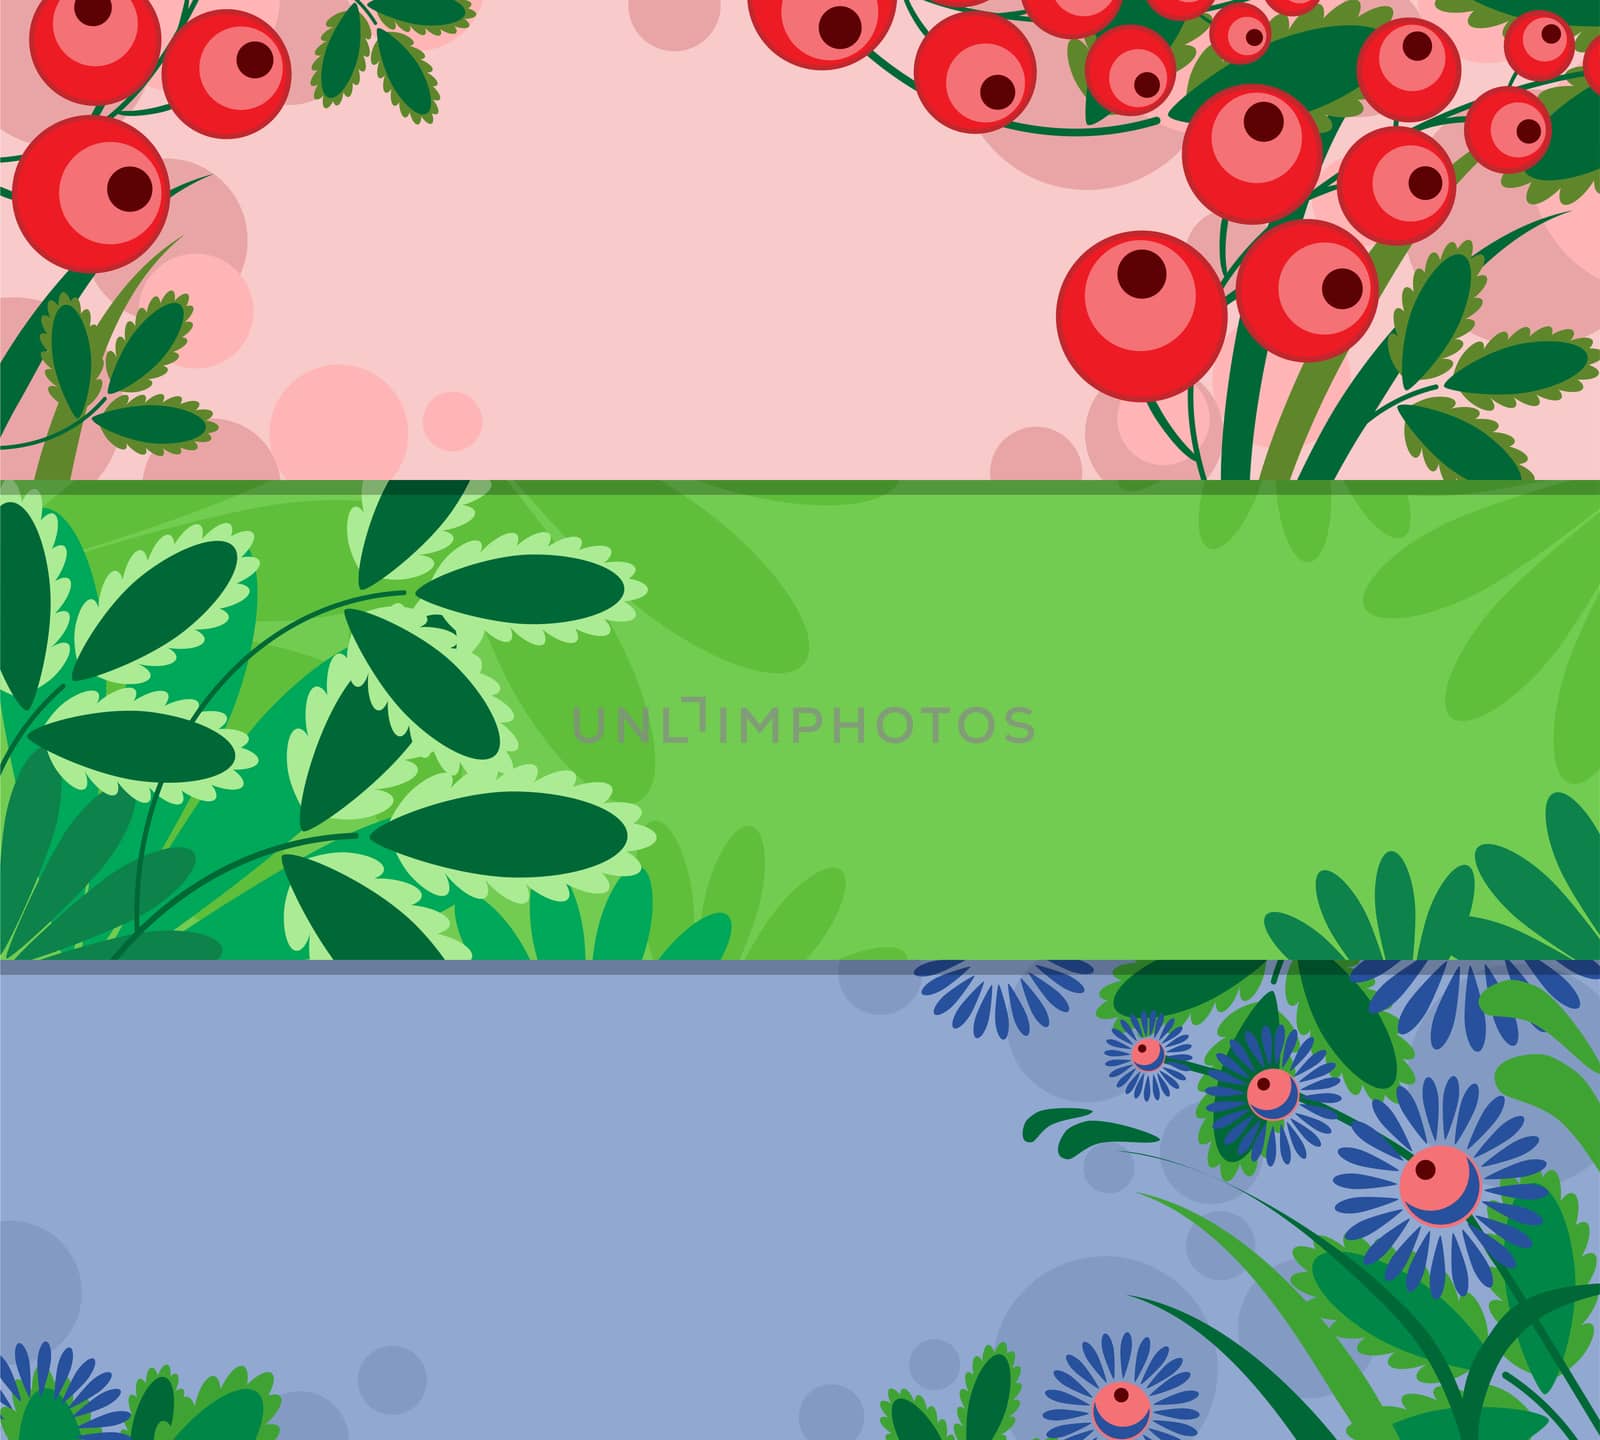 Collection of horizontal banners with floral elements and place for your text. by Adamchuk